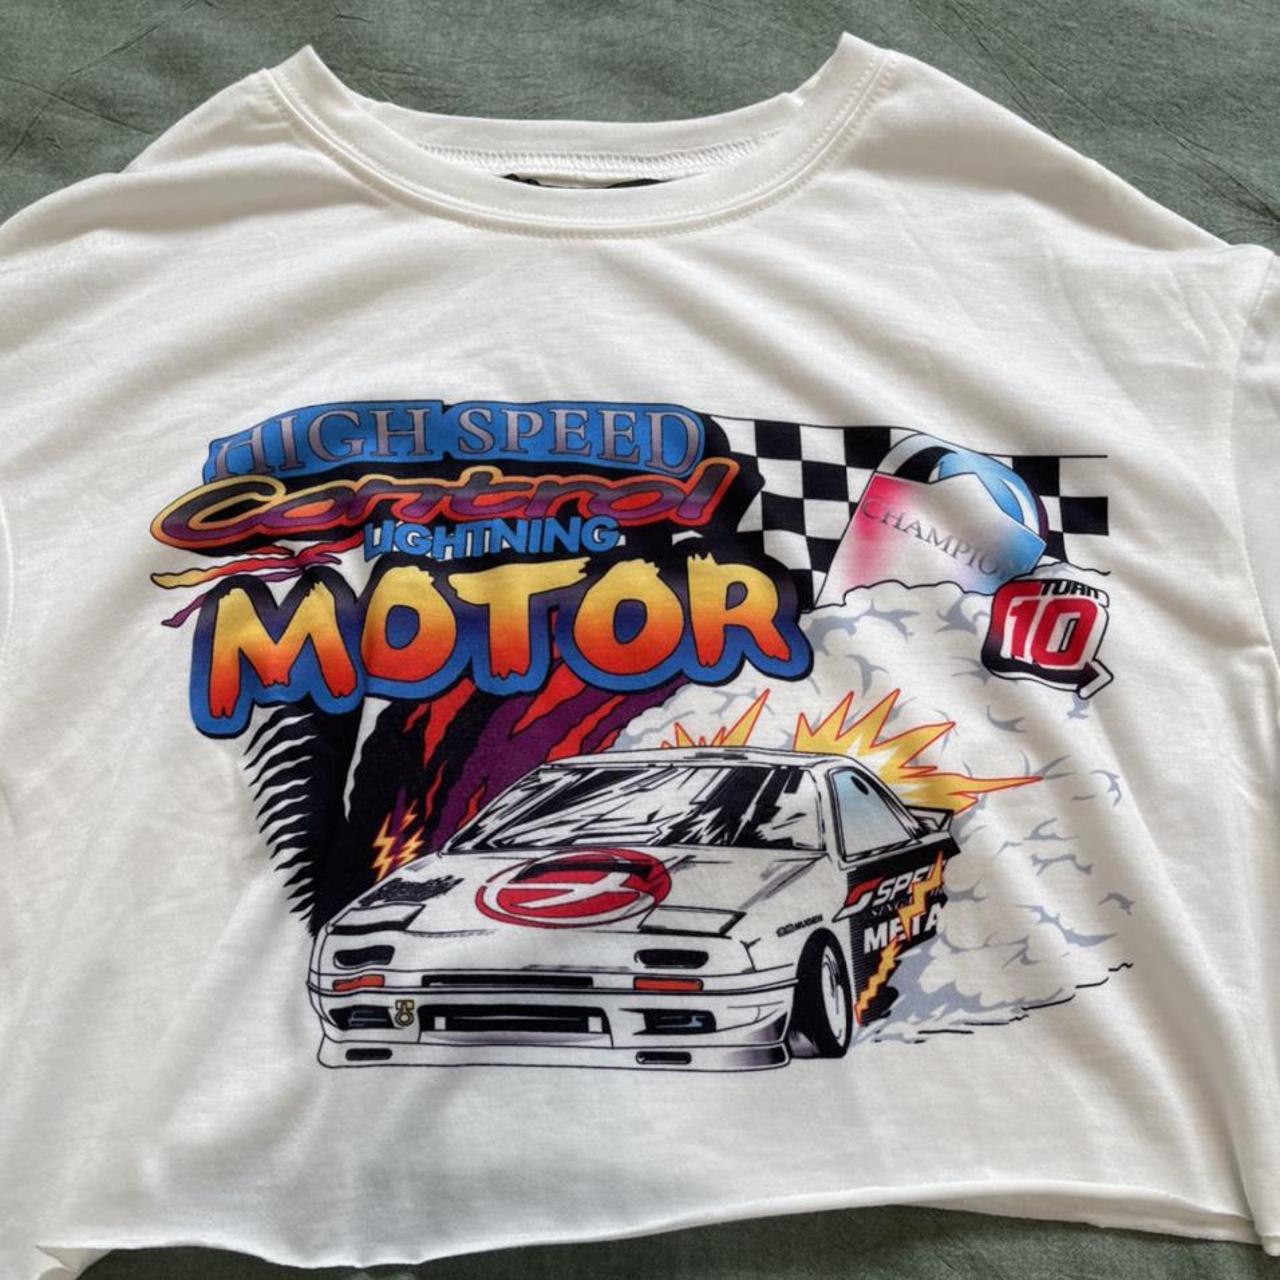 Product Image 3 - Cropped graphic car top
Size M
Brand